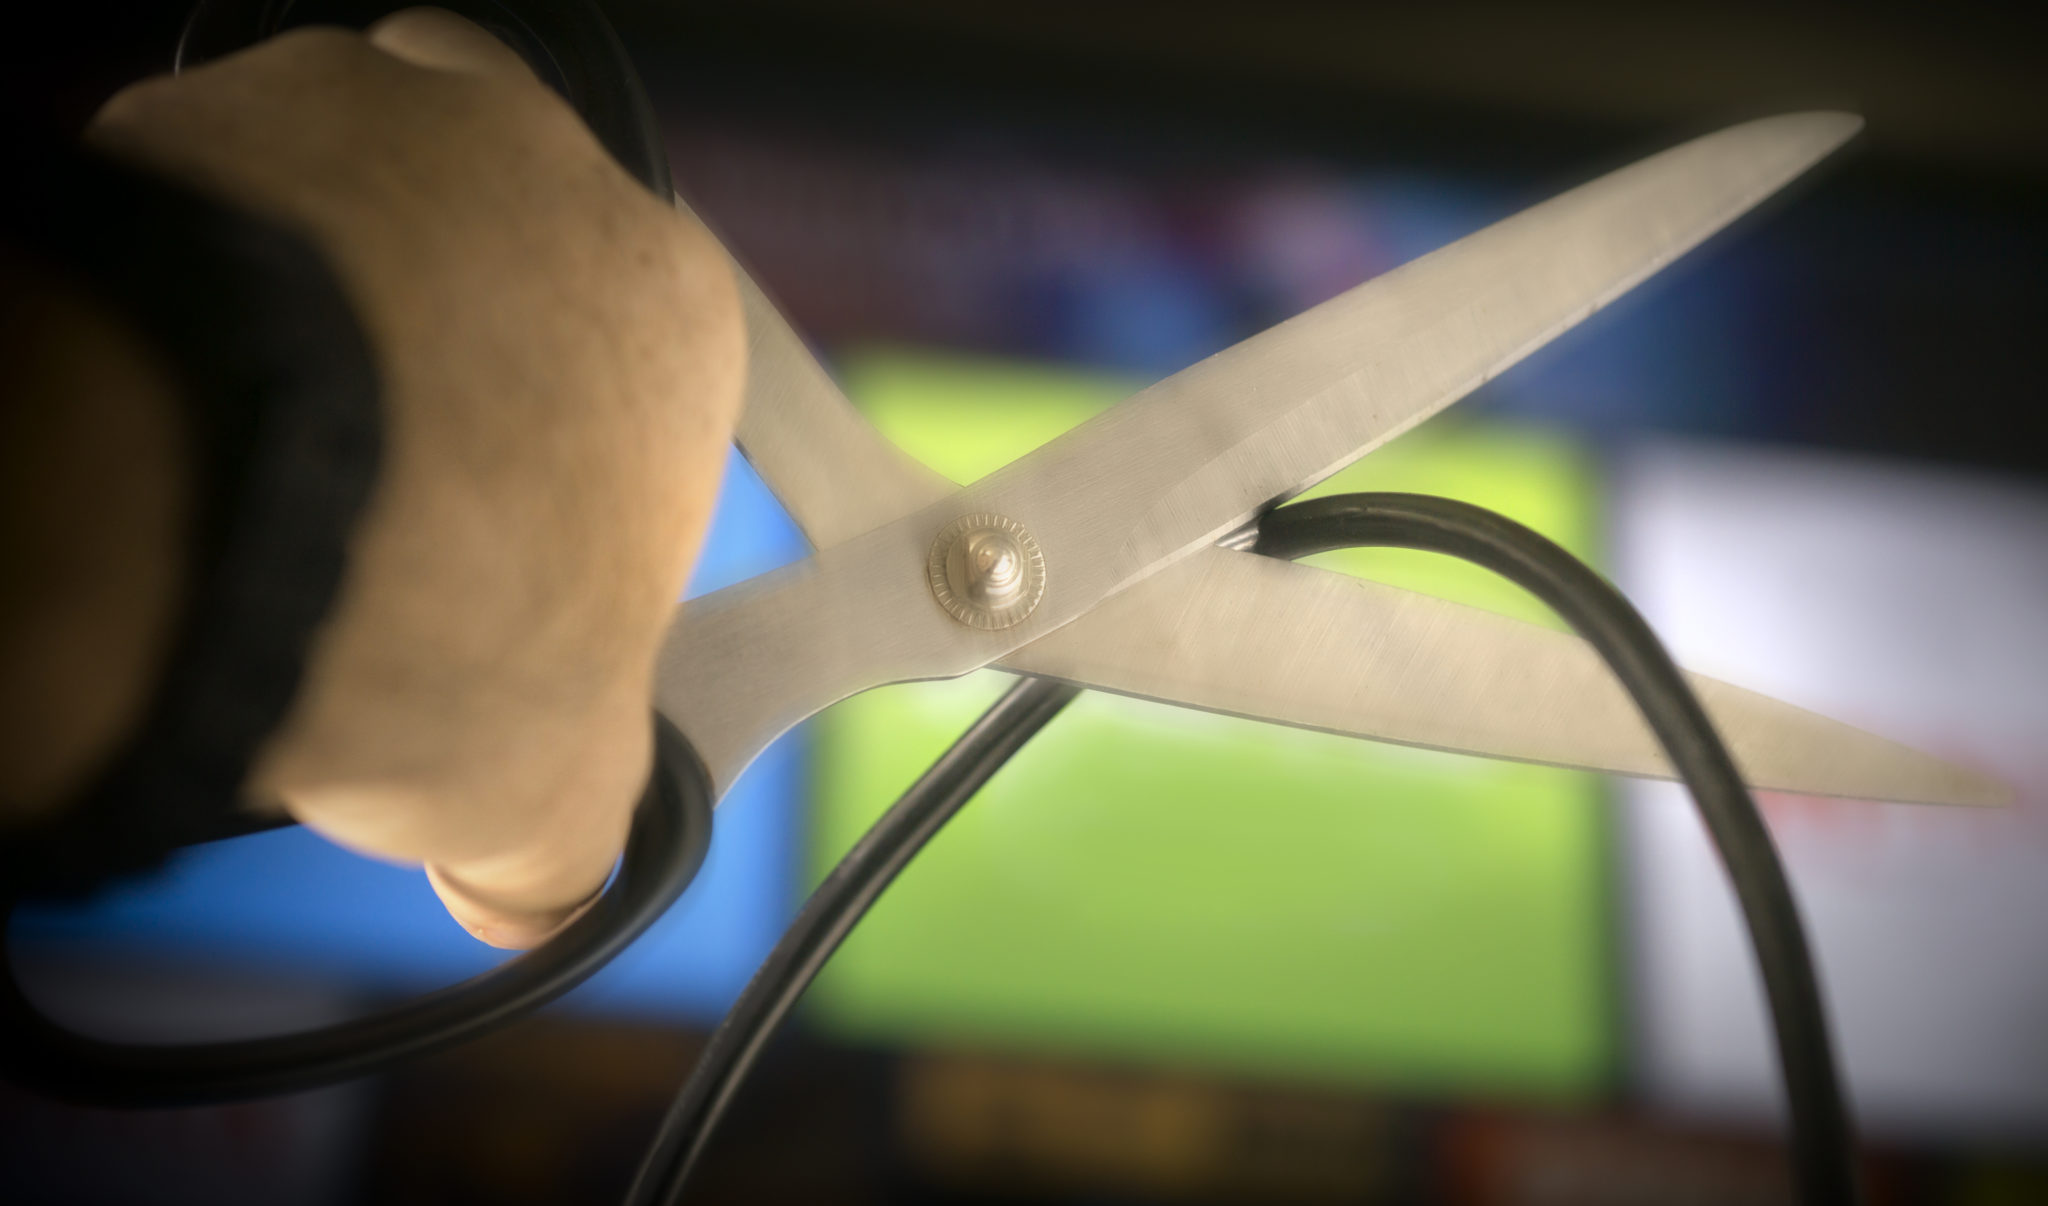 Cord Cutting 2.0 is Here As Cable TV Companies See Internet Growth Slow